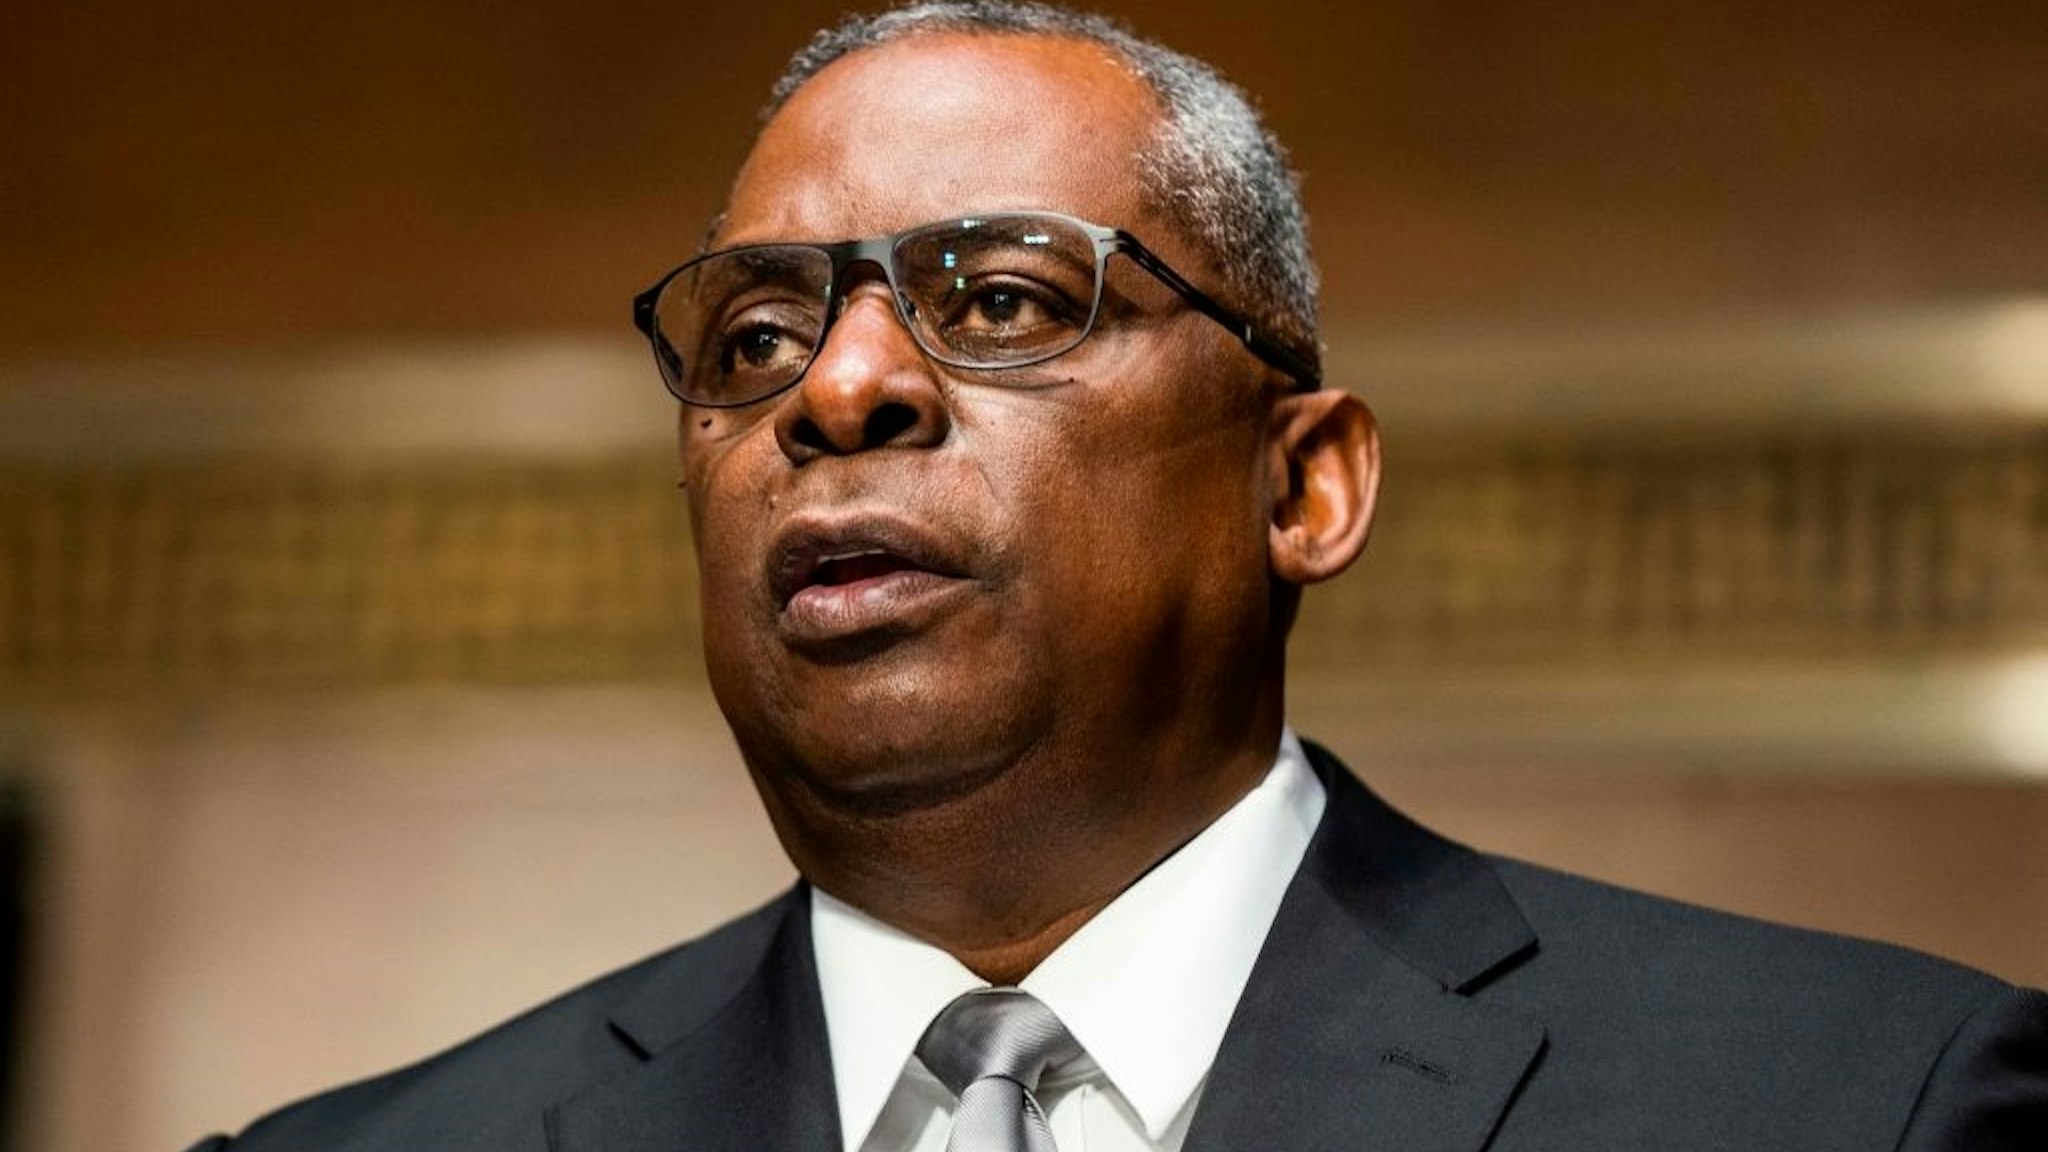 Retired General Lloyd Austin testifies before the Senate Armed Services Committee during his conformation hearing to be the next Secretary of Defense in the Dirksen Senate Office Building in Washington, DC, on January 19, 2021.